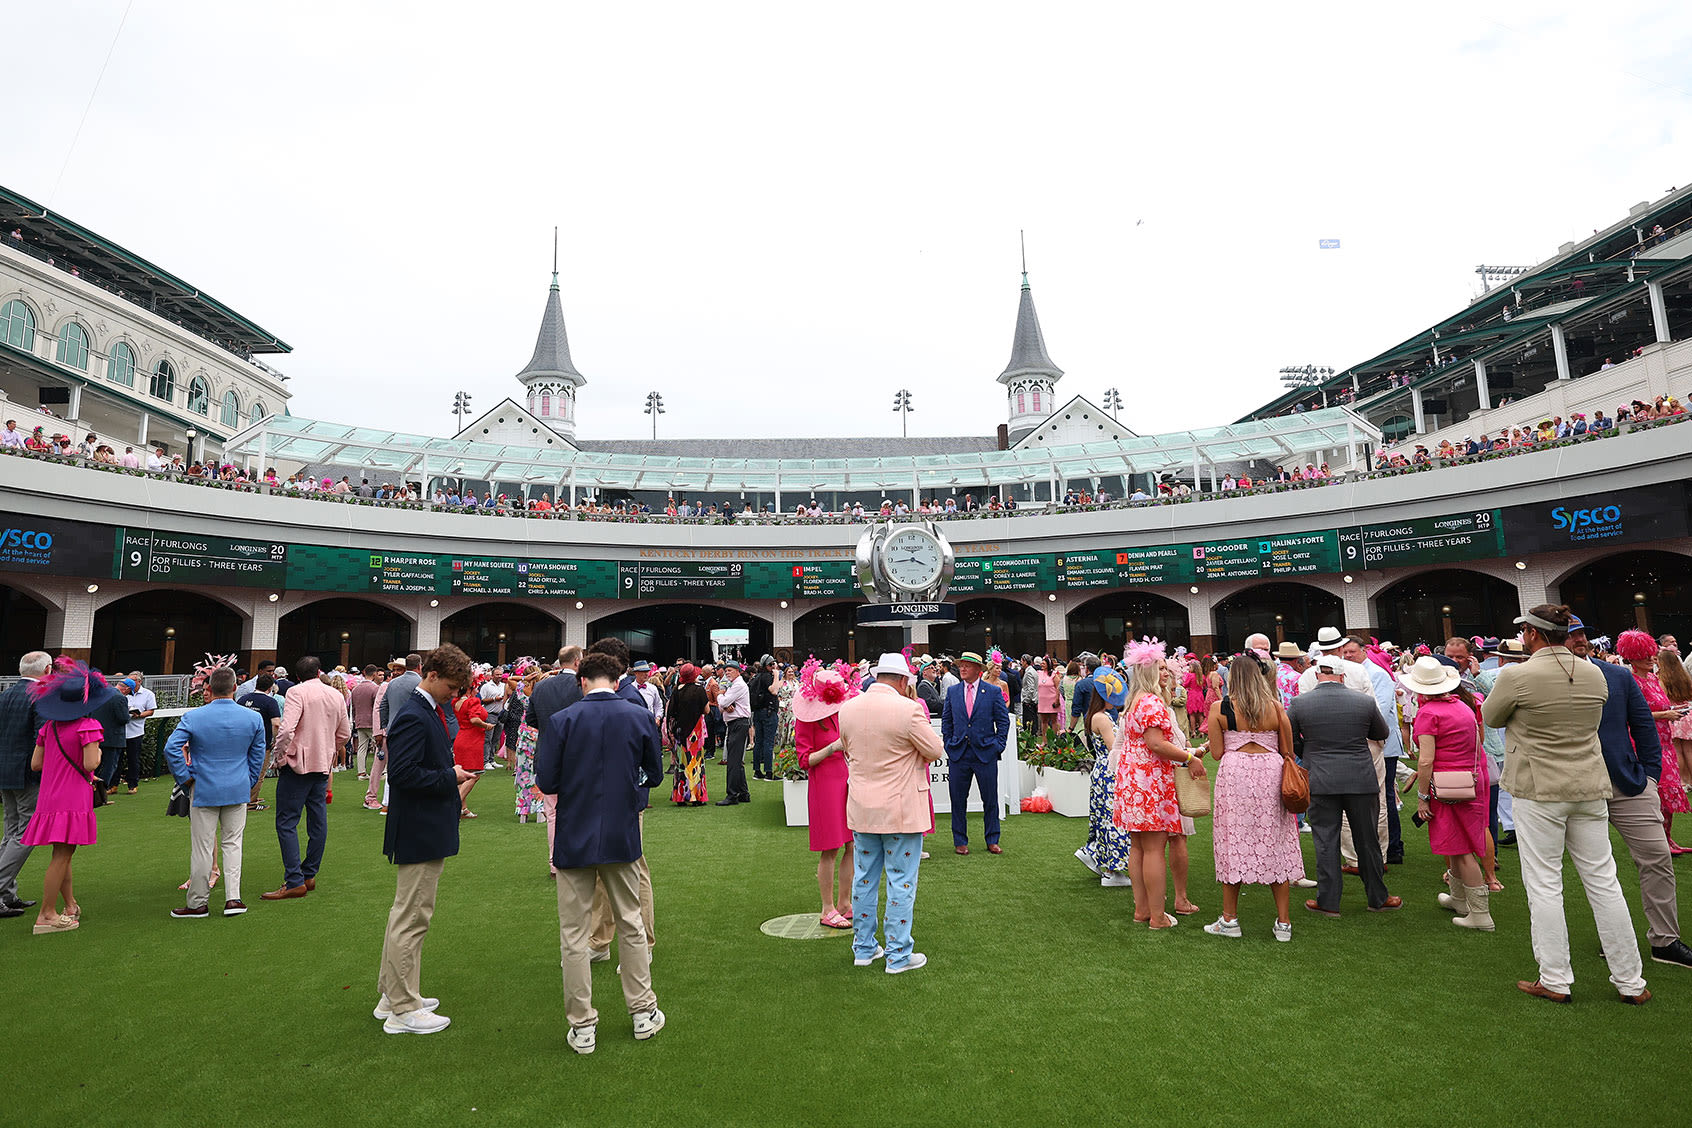 The Kentucky Derby is tamed and a shame